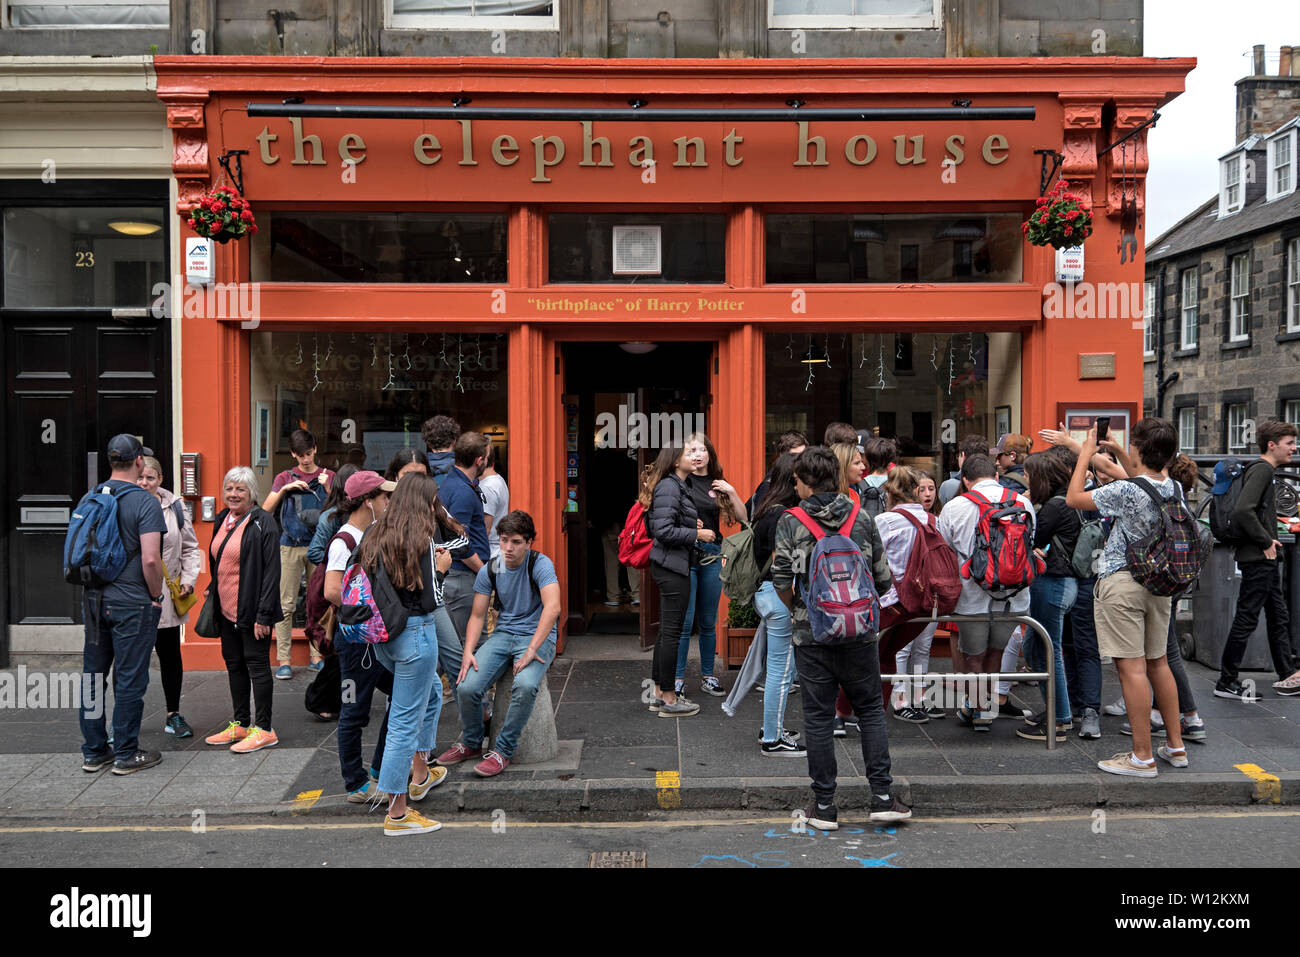 A visiting school group stops outside The Elephant House, which claims to be the 'birthplace of Harry Potter' on George IV Bridge, Edinburgh, Scotland Stock Photo